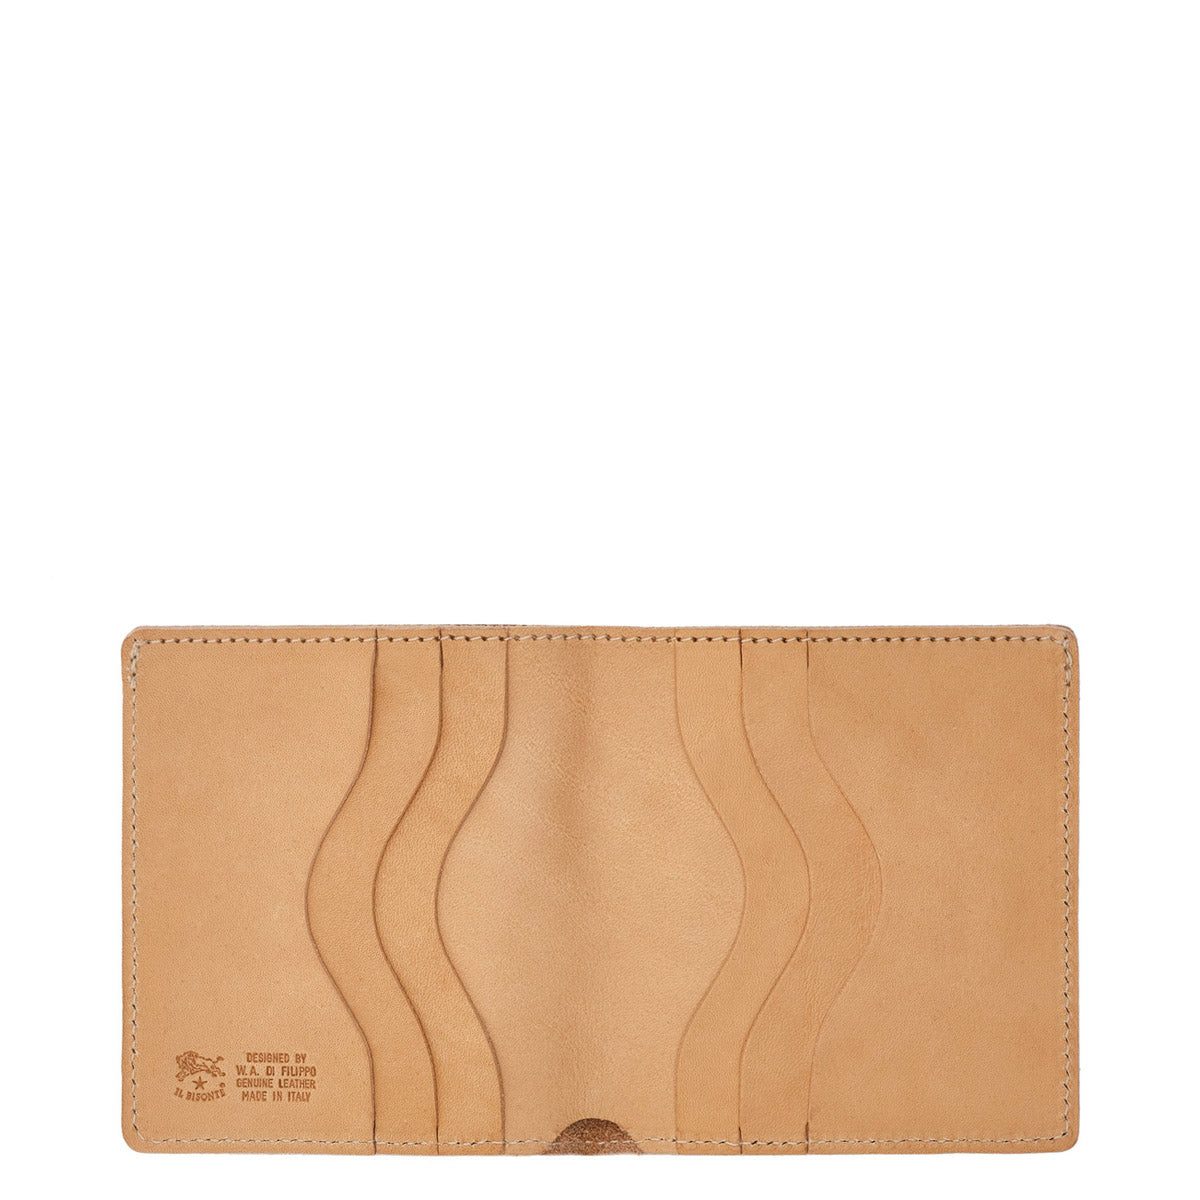 Il Bisonte Small Wallet - Natural